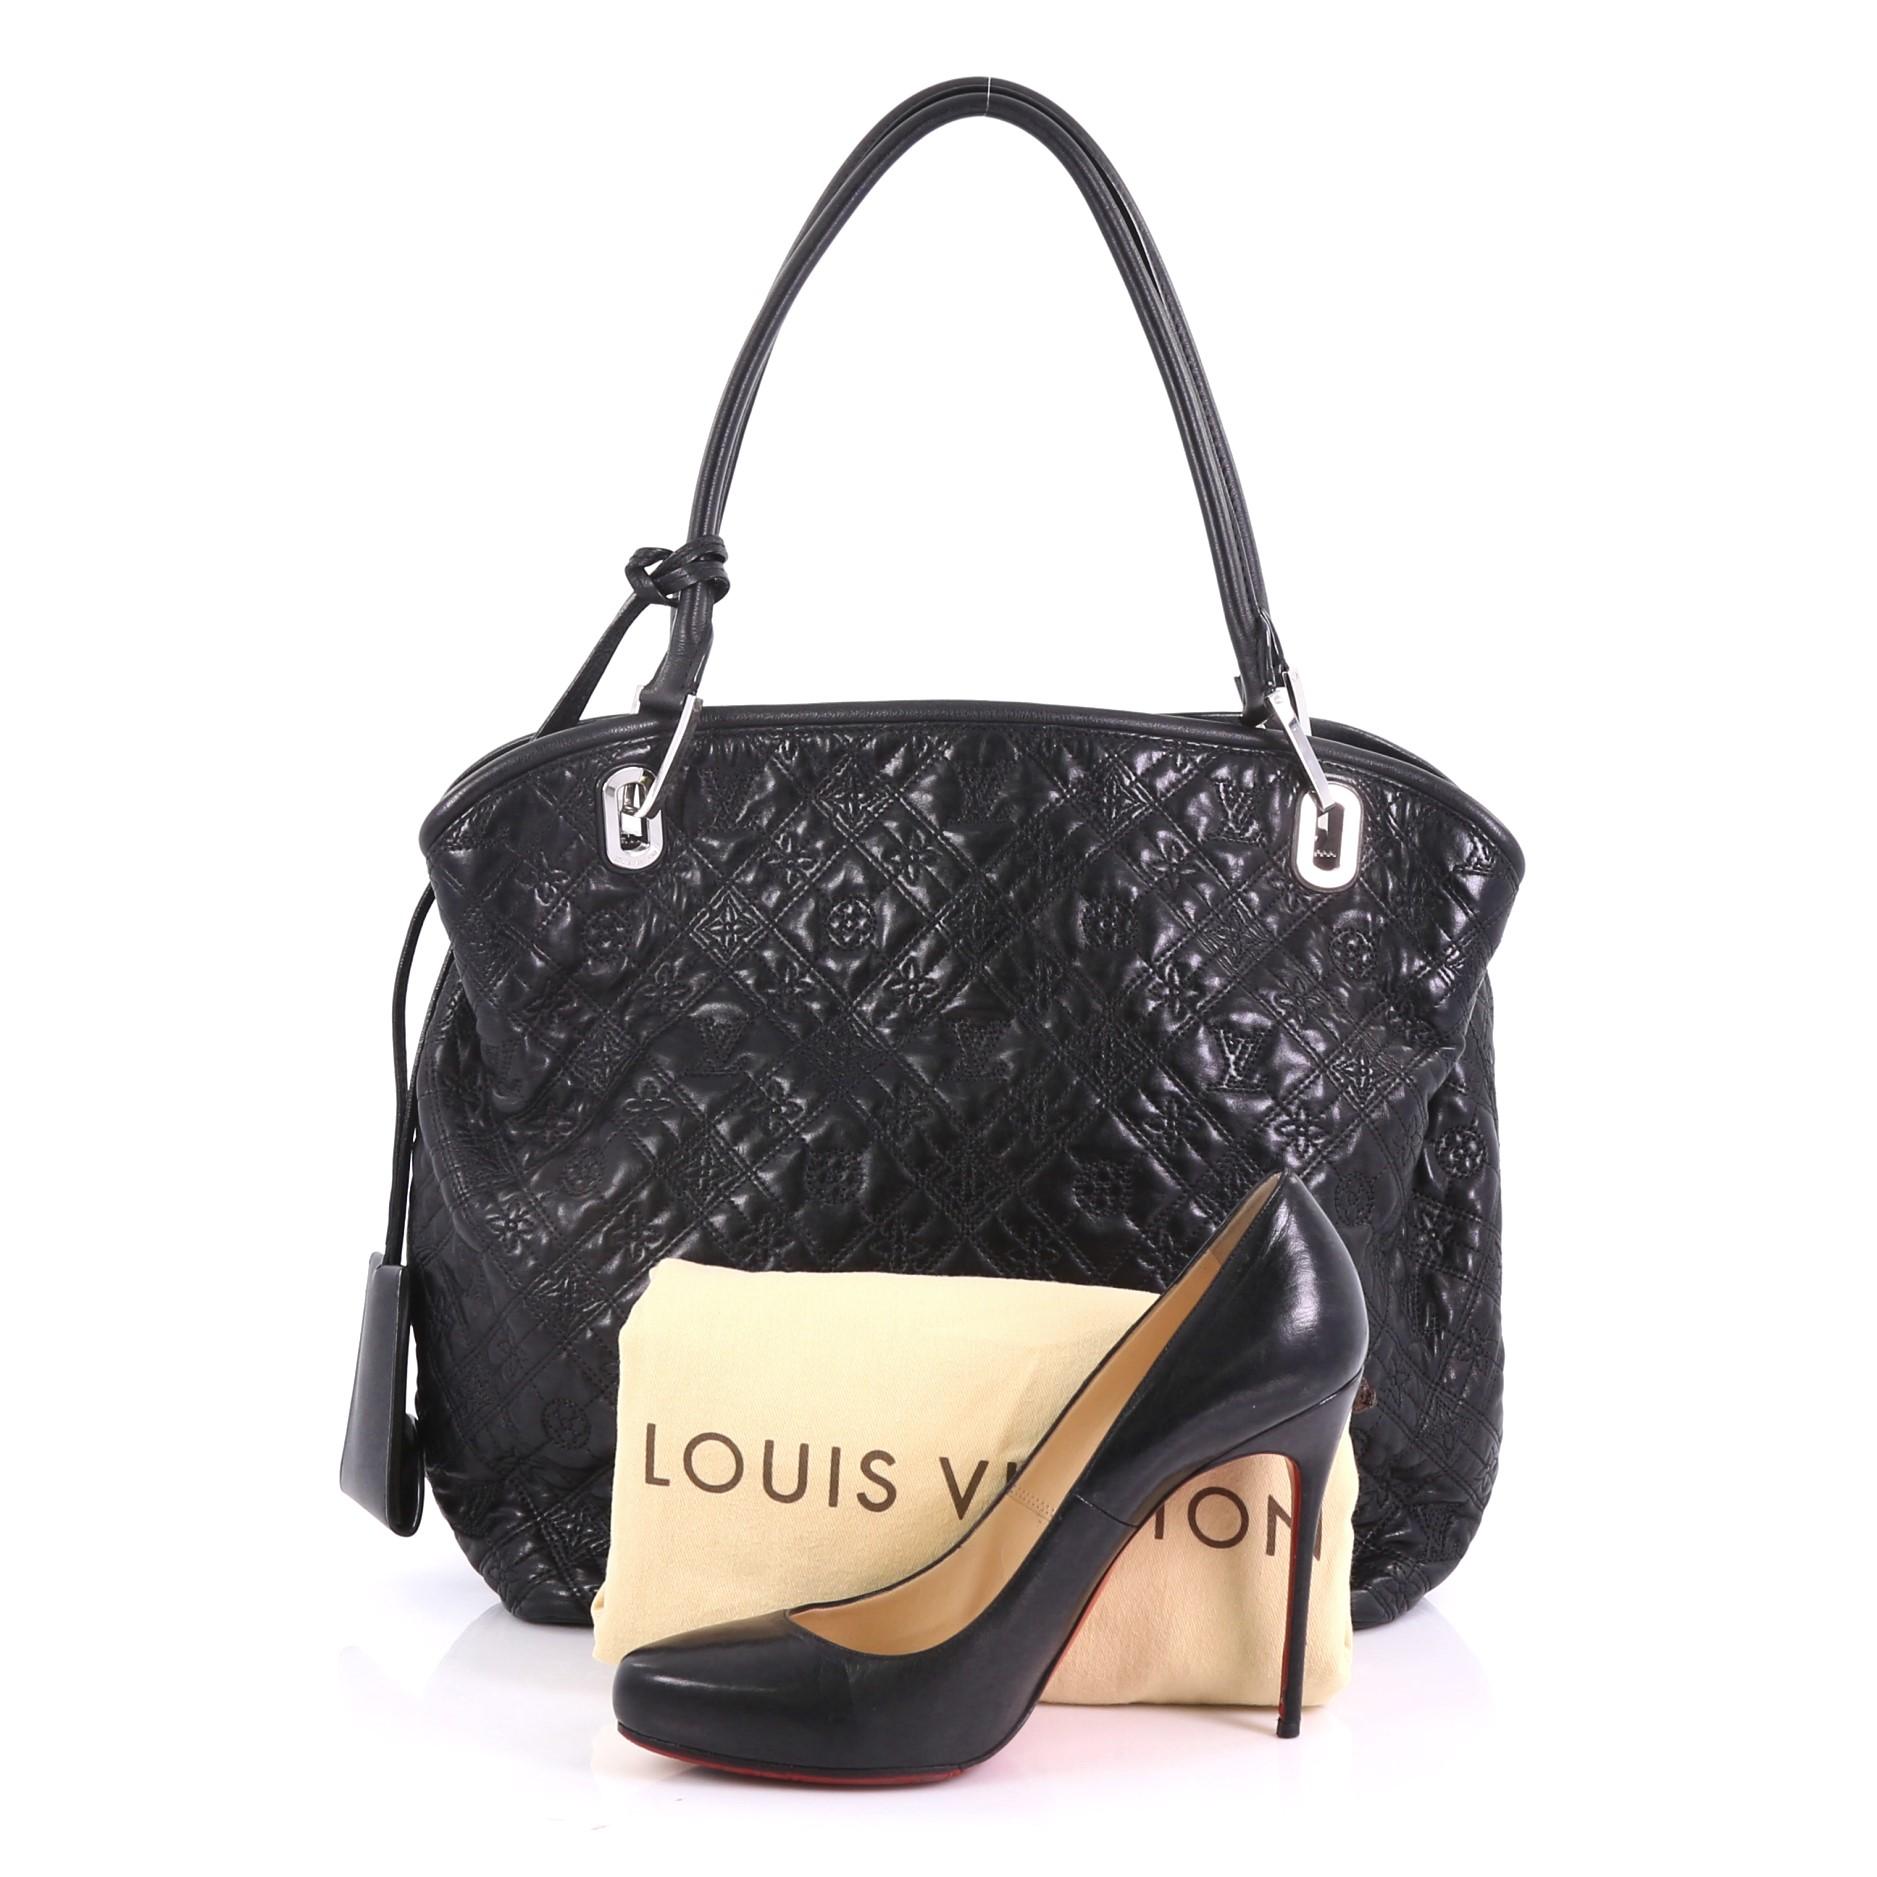 This Louis Vuitton Antheia Lilia Handbag Leather GM, crafted from black monogram antheia embroidered leather, features dual rolled leather handles, decorative padlock, and silver-tone hardware. It opens to a black microfiber interior with a center